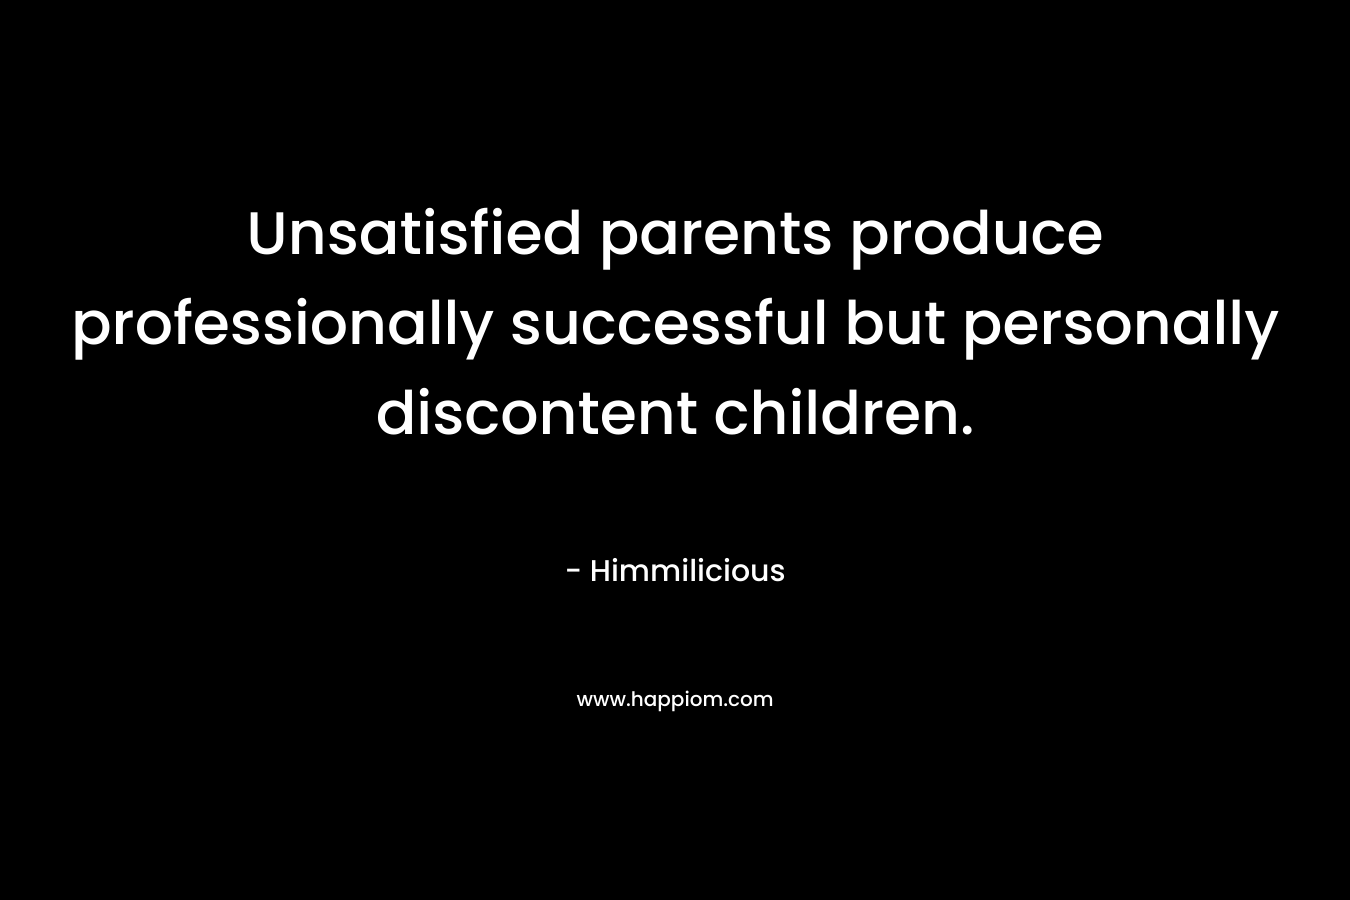 Unsatisfied parents produce professionally successful but personally discontent children. – Himmilicious